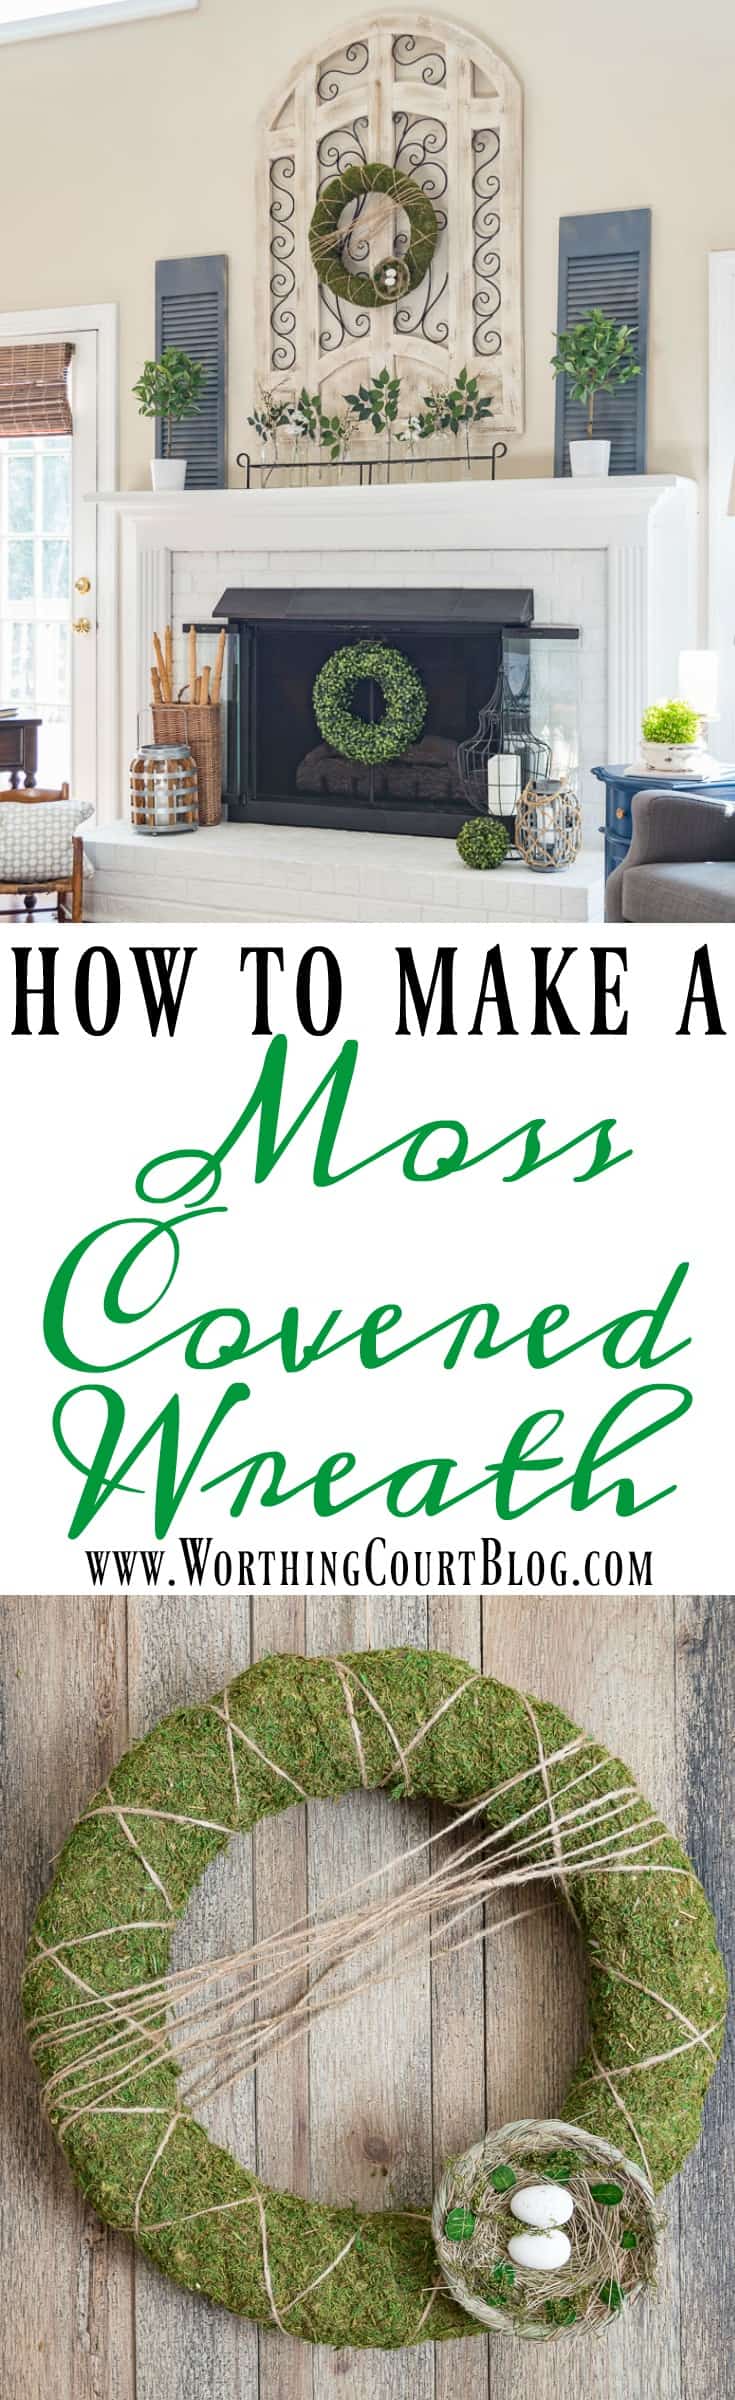 How To Make A Moss Covered Wreath graphic.